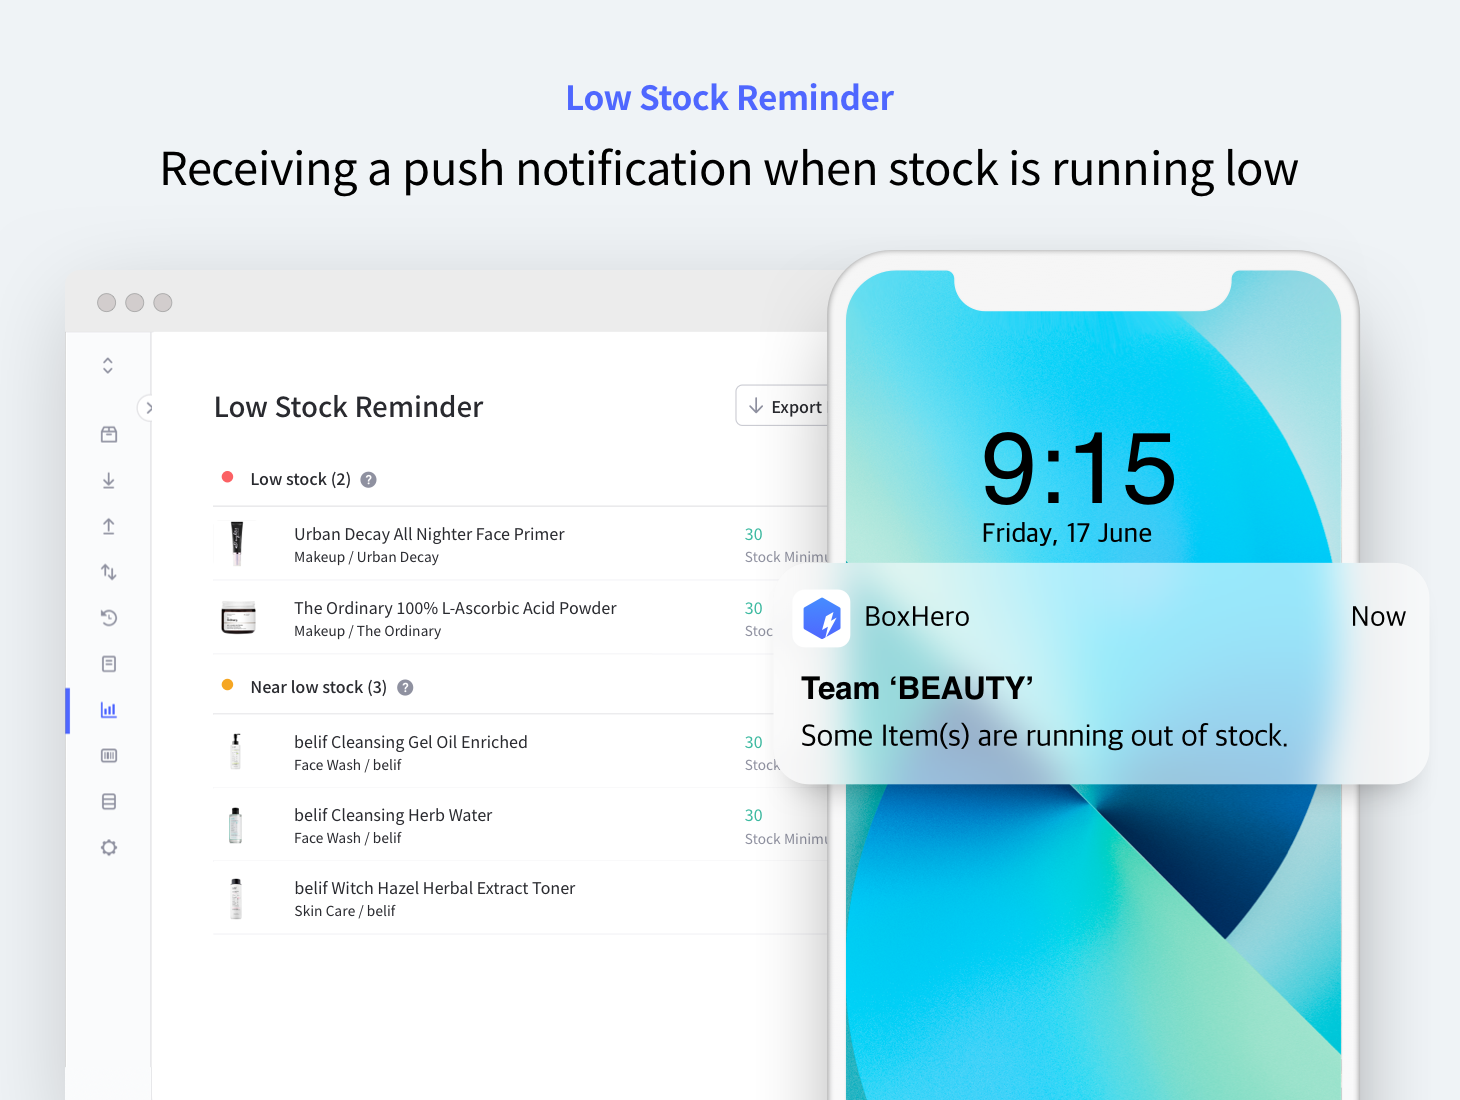 Low Stock Reminder: Receive a push notification when stock is running low